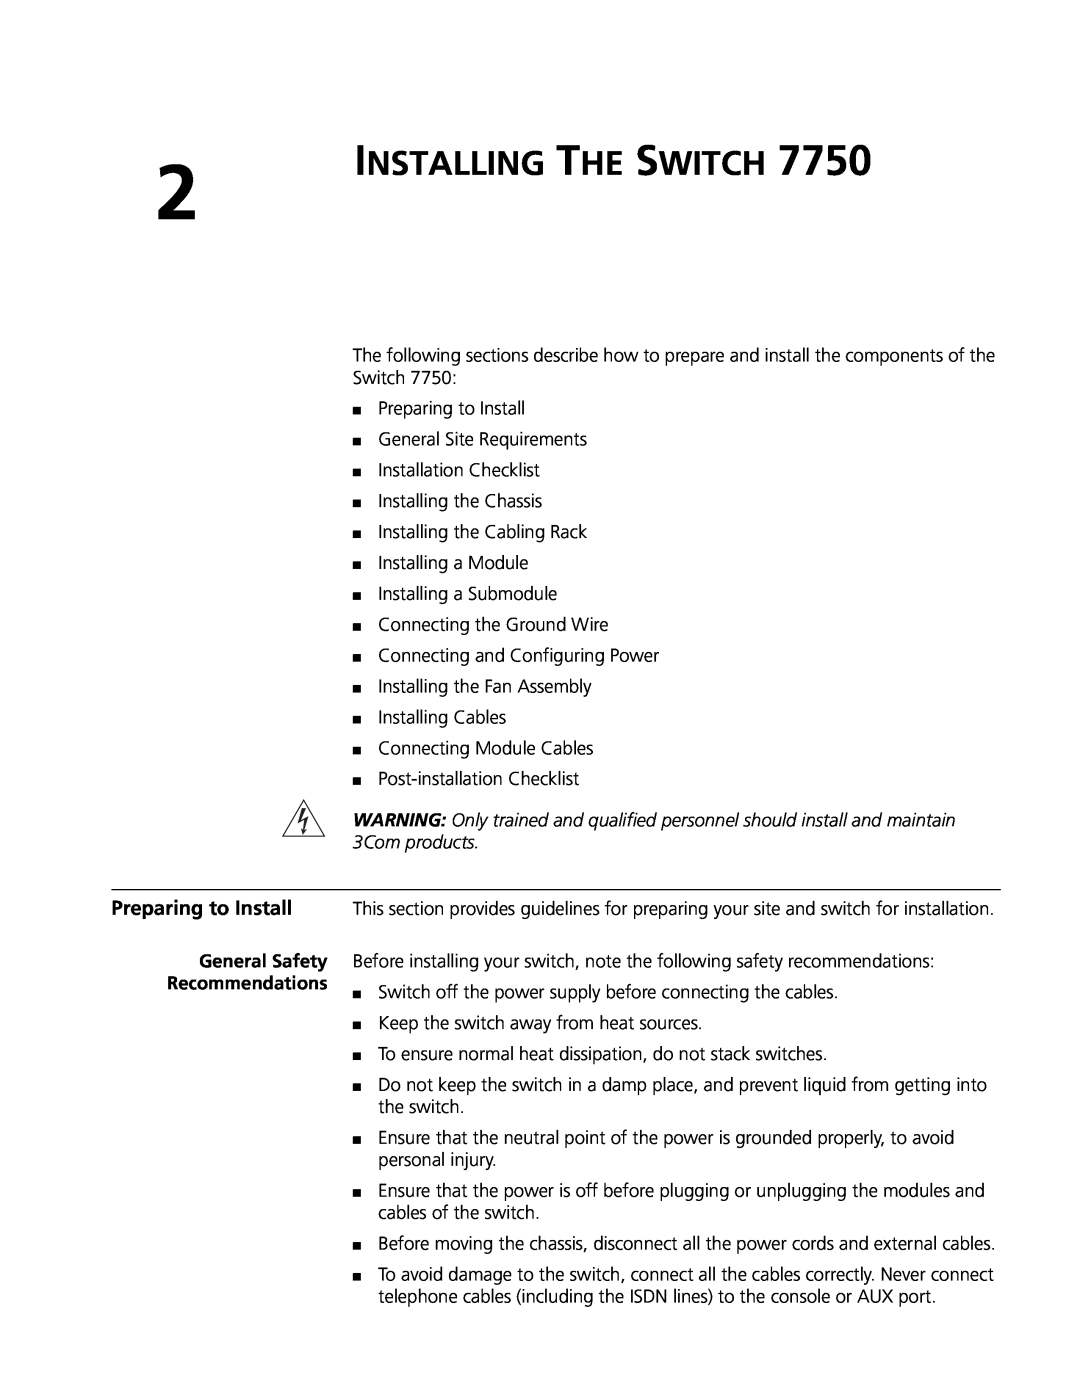 3Com 3C16894 4-slot Chassis manual Installing The Switch, Preparing to Install, General Safety Recommendations 